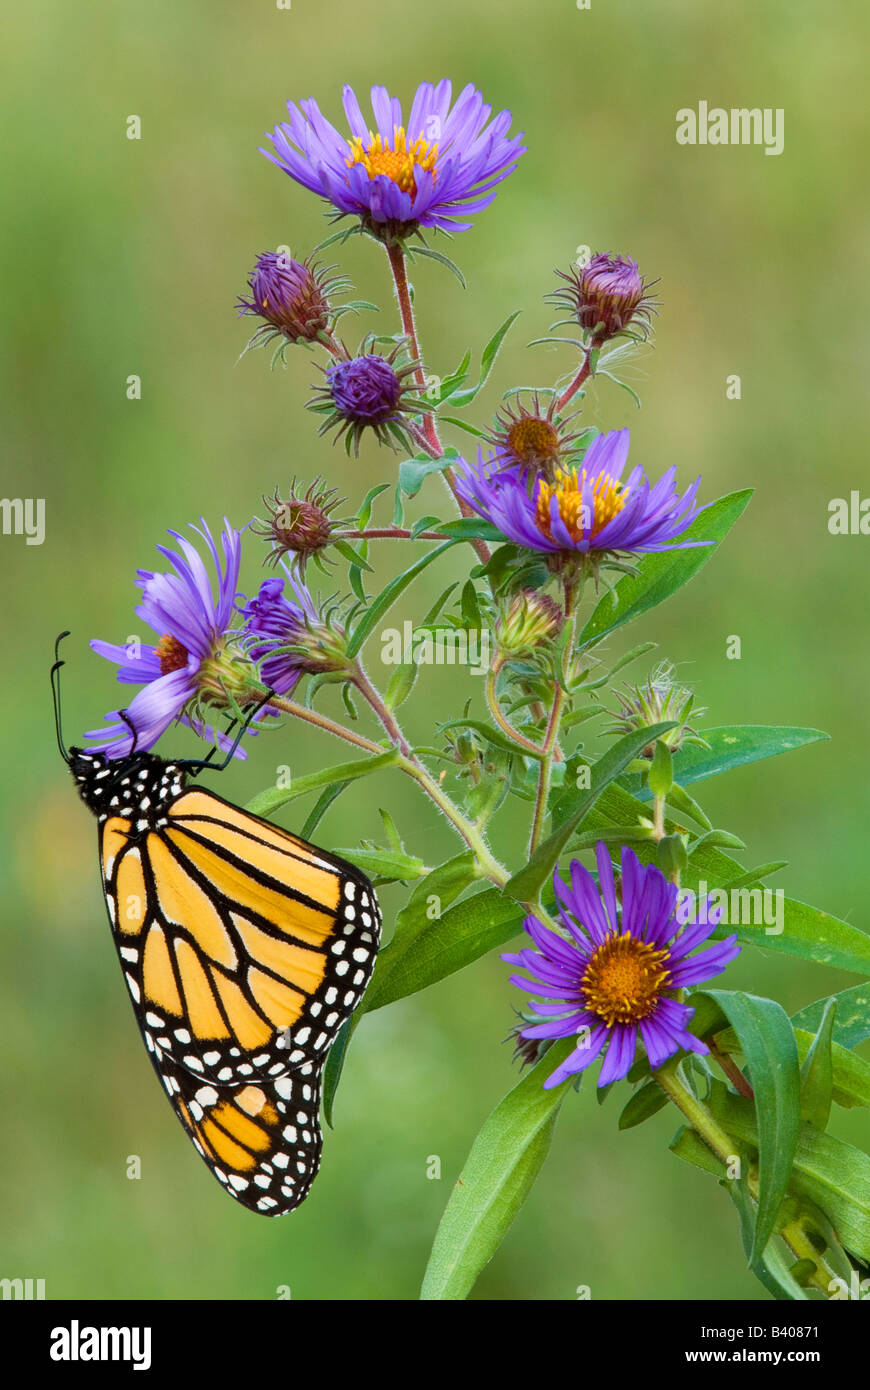 Monarch Butterfly Danaus plexippus nectaring or feeding on New England Asters Symphyotrichum novae-angliae Eastern United States Stock Photo